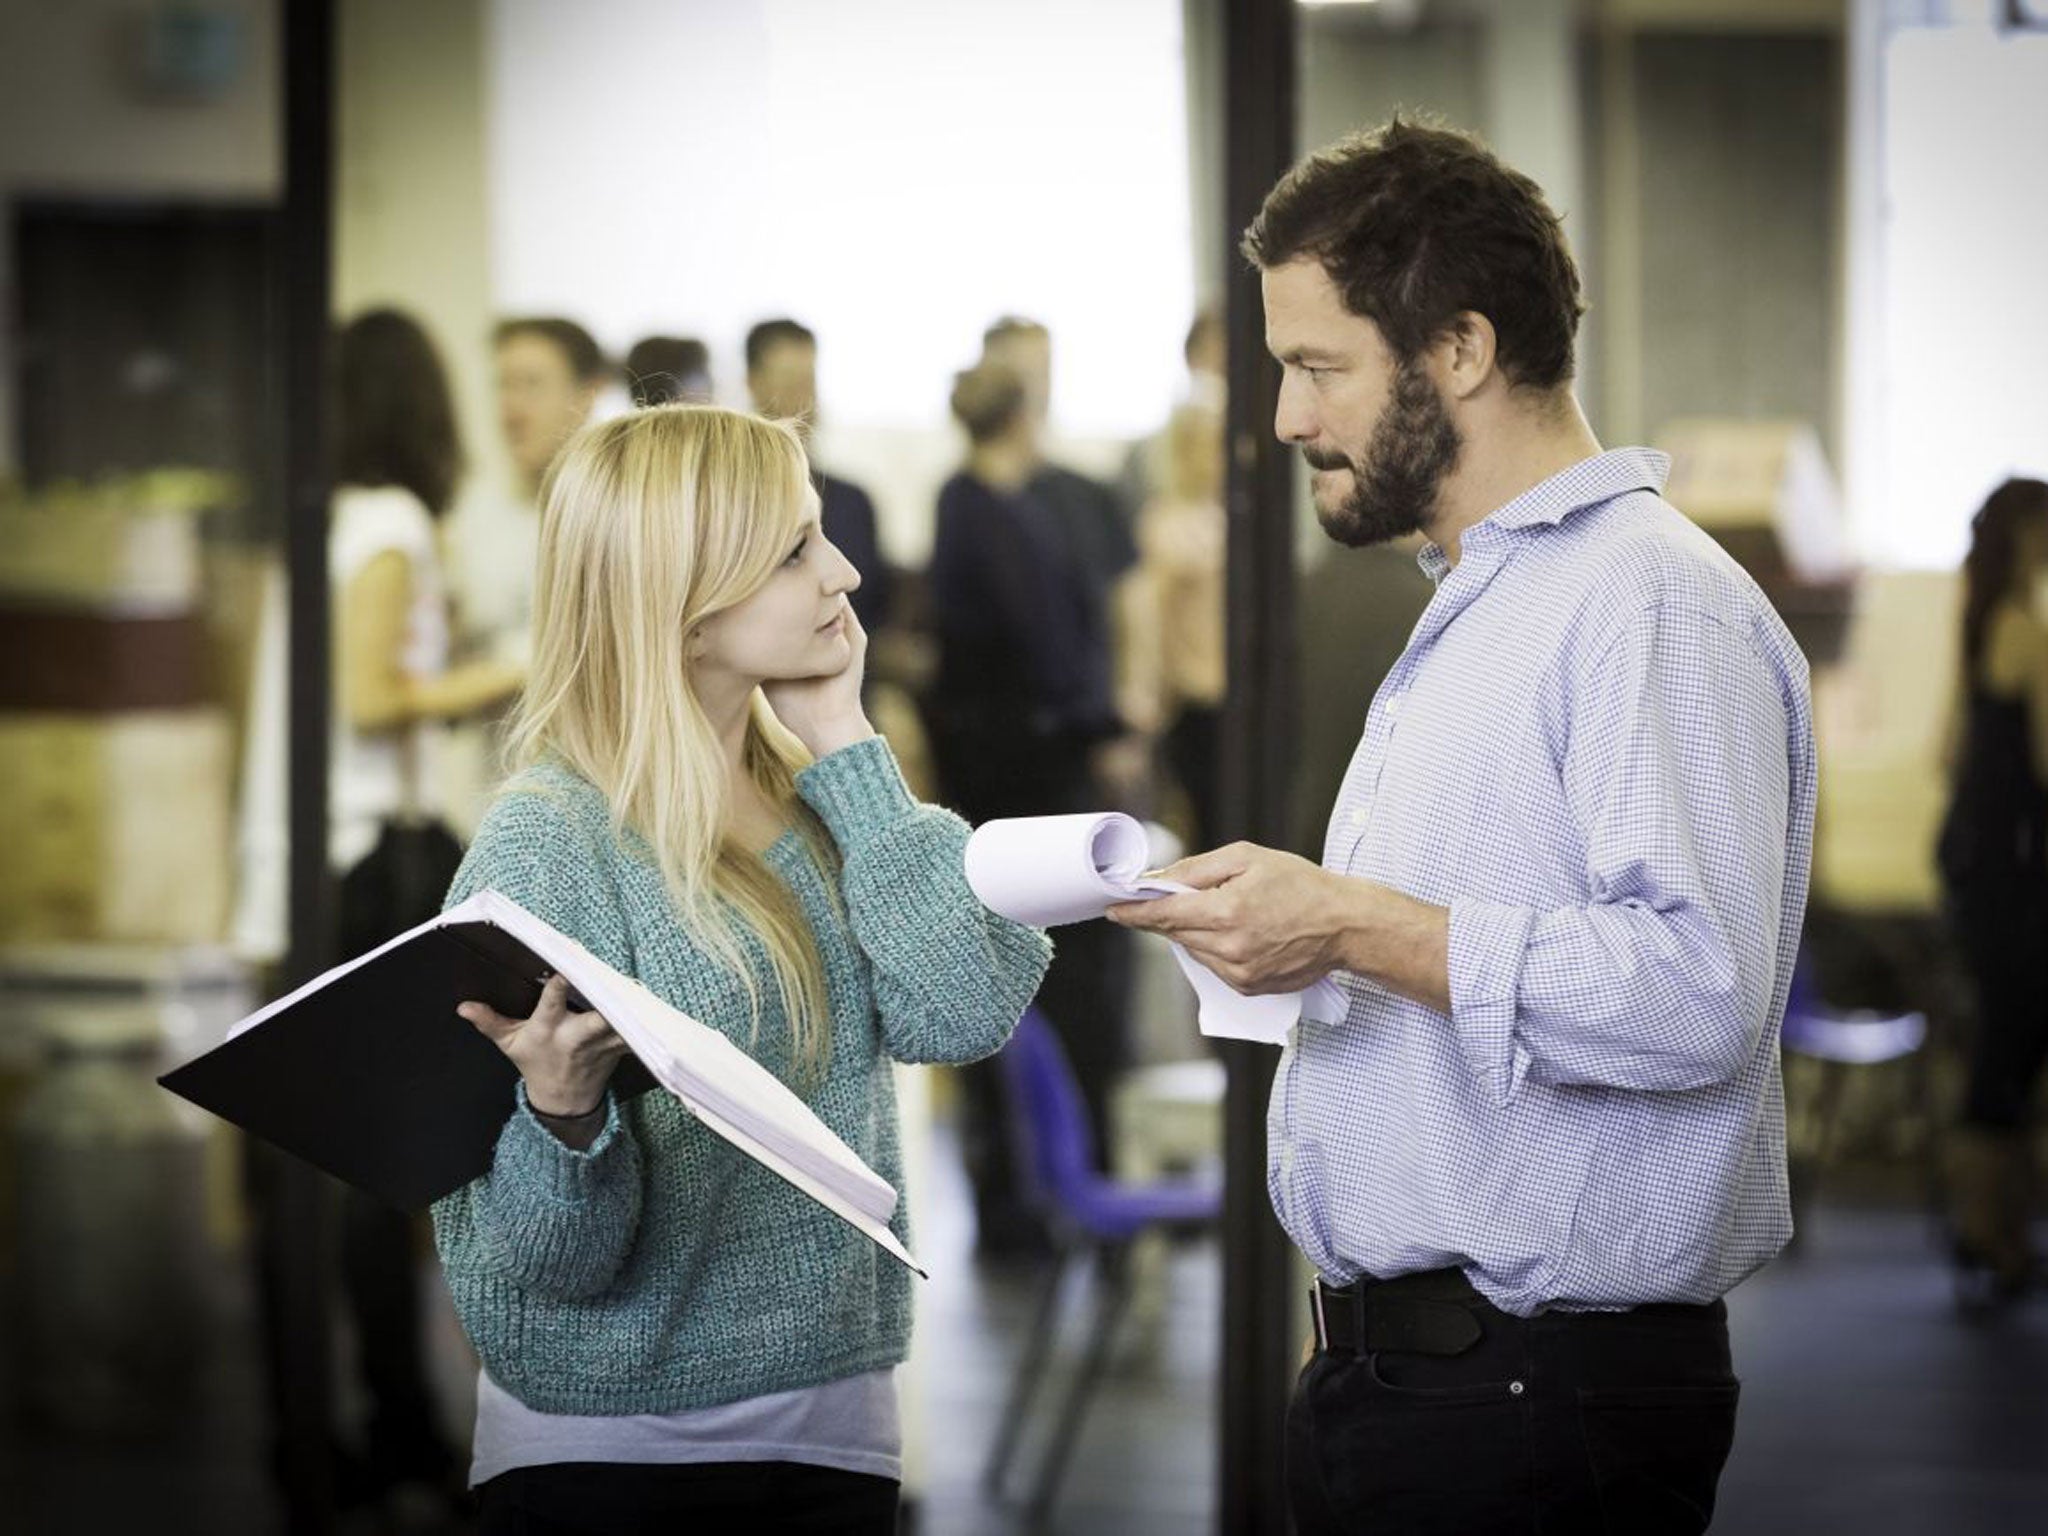 He’s grown accustomed to her face: Carly Bawden and Dominic West in rehearsals for ‘My Fair Lady’